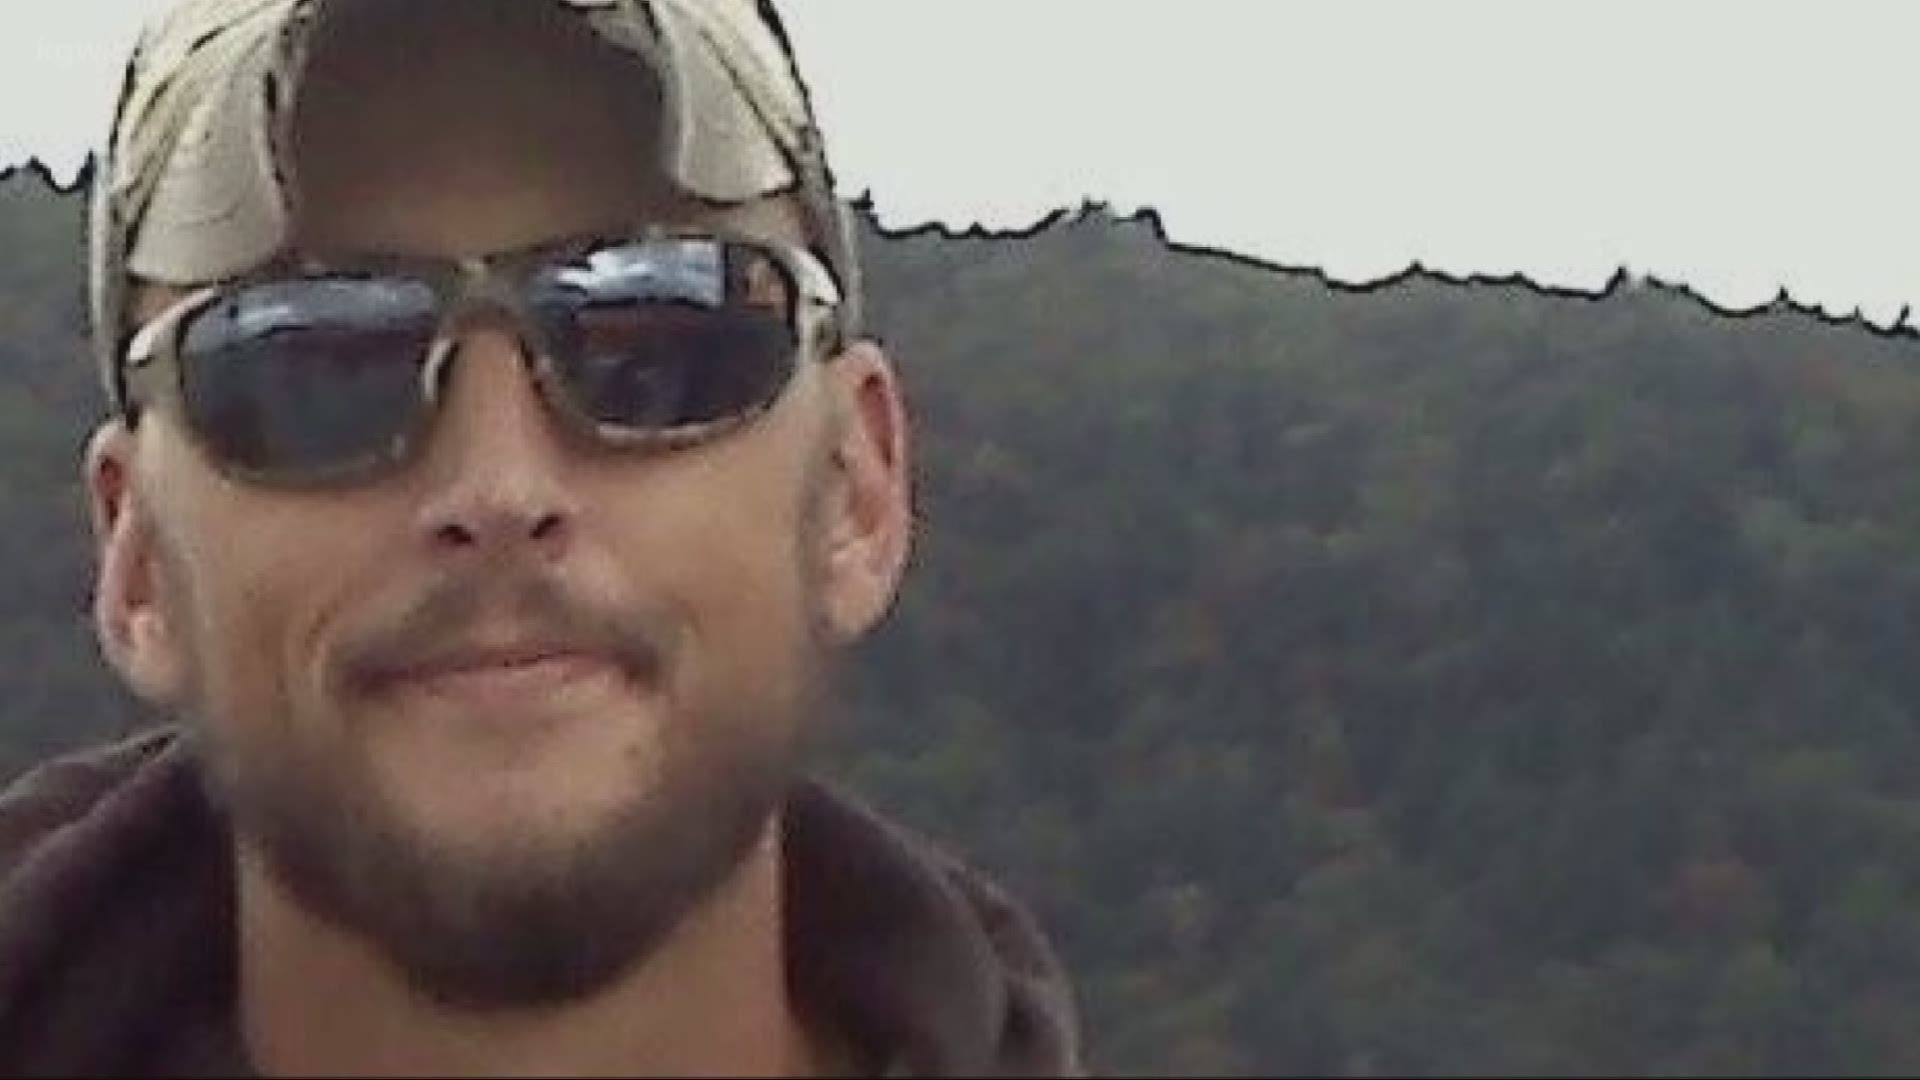 Deputies find body of hunter missing for two weeks in southwest Washington.